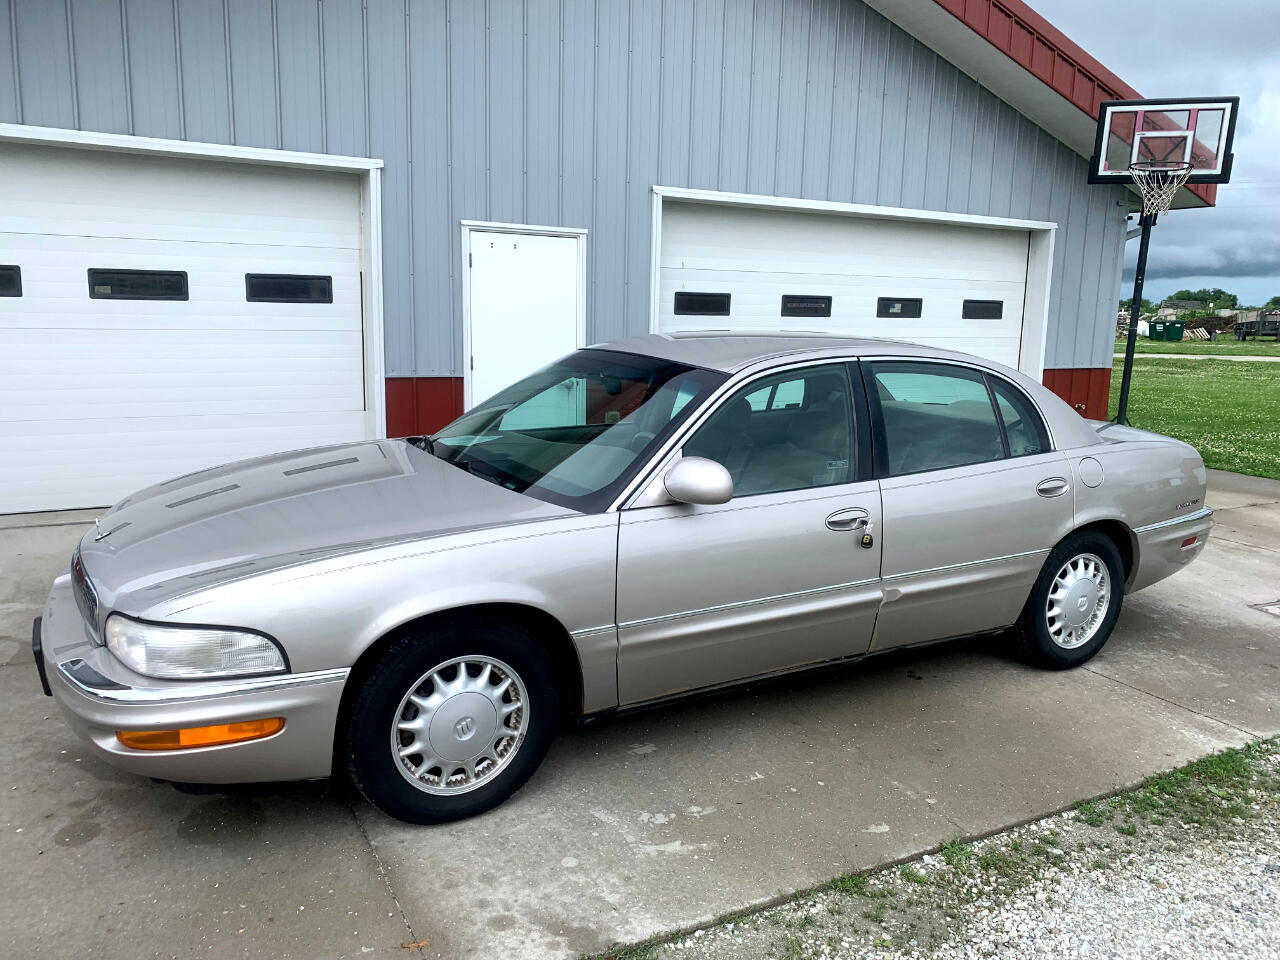 Used 1998 Buick Park Avenue Sold in Macomb IL 61455 Car Care Center